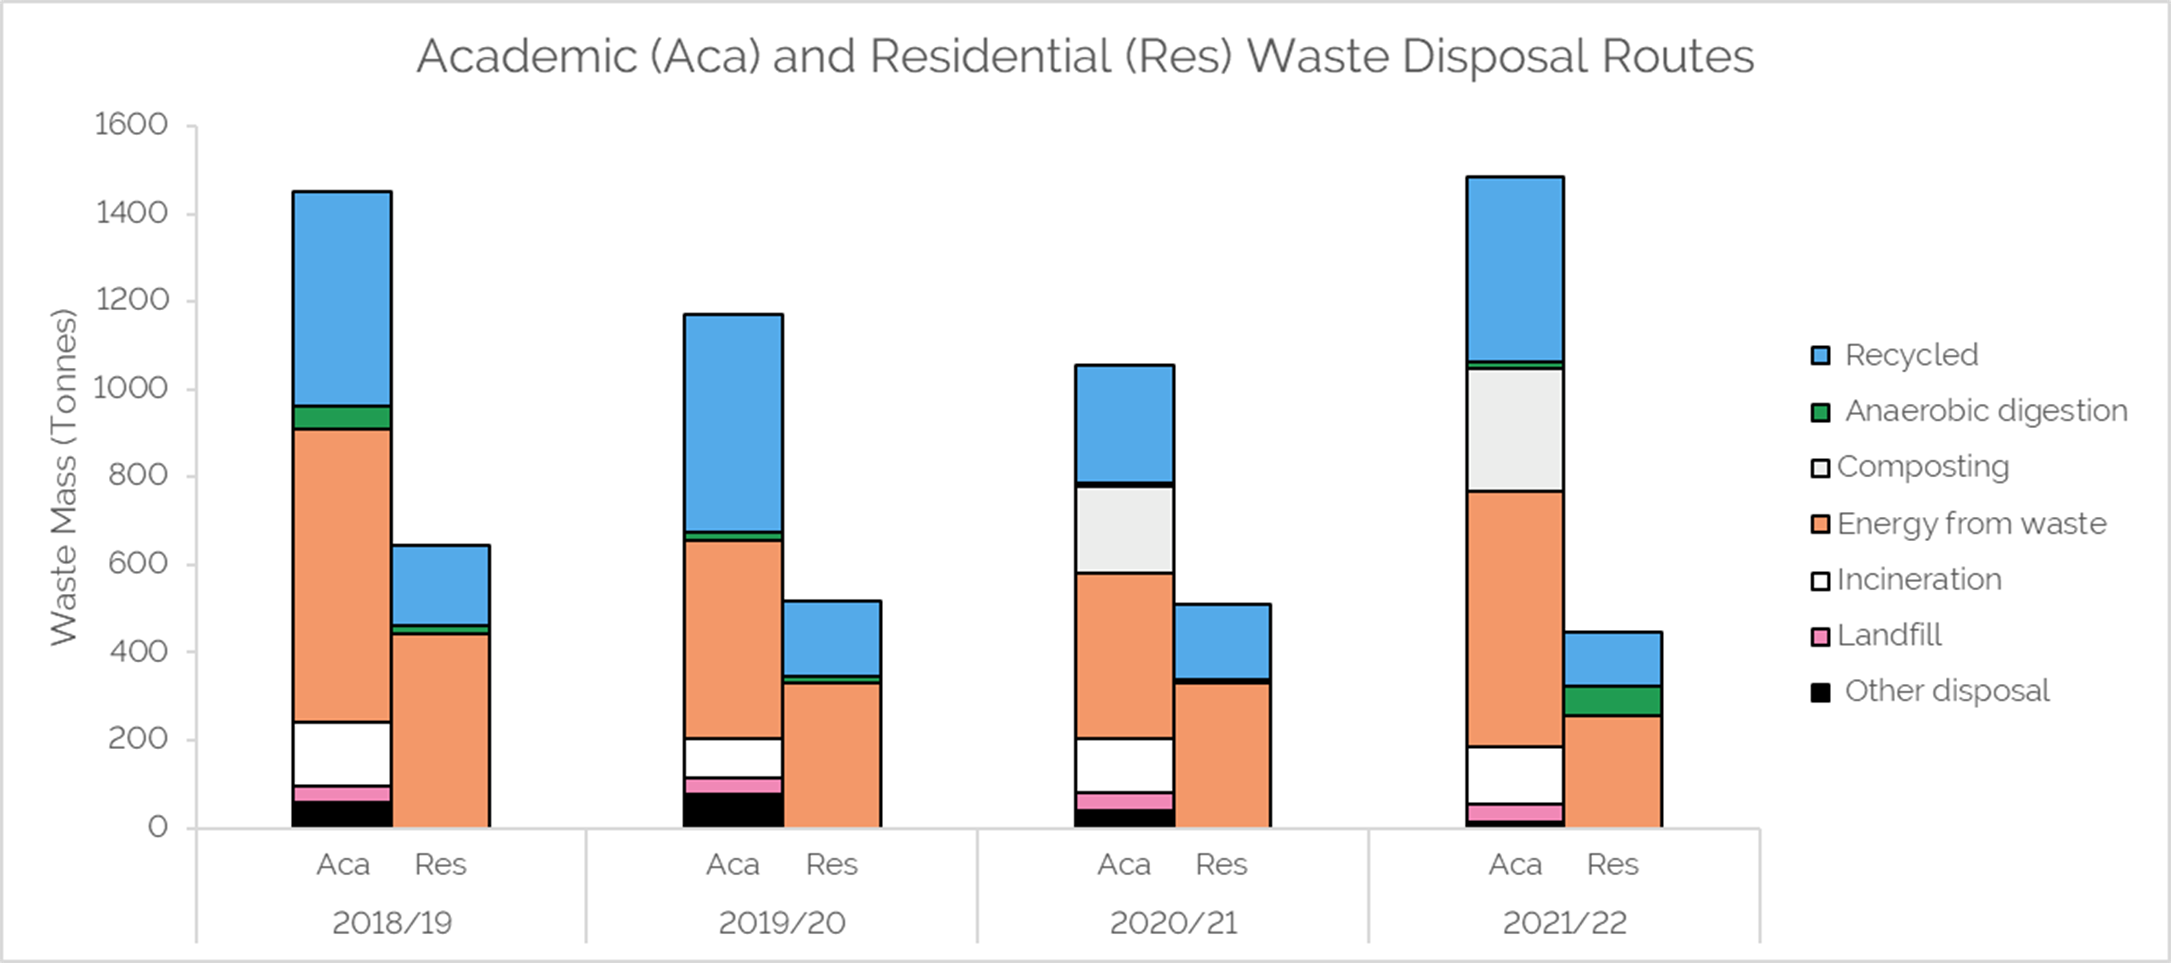 A bar graph of academic and residential waste disposal routes from years 2018-22